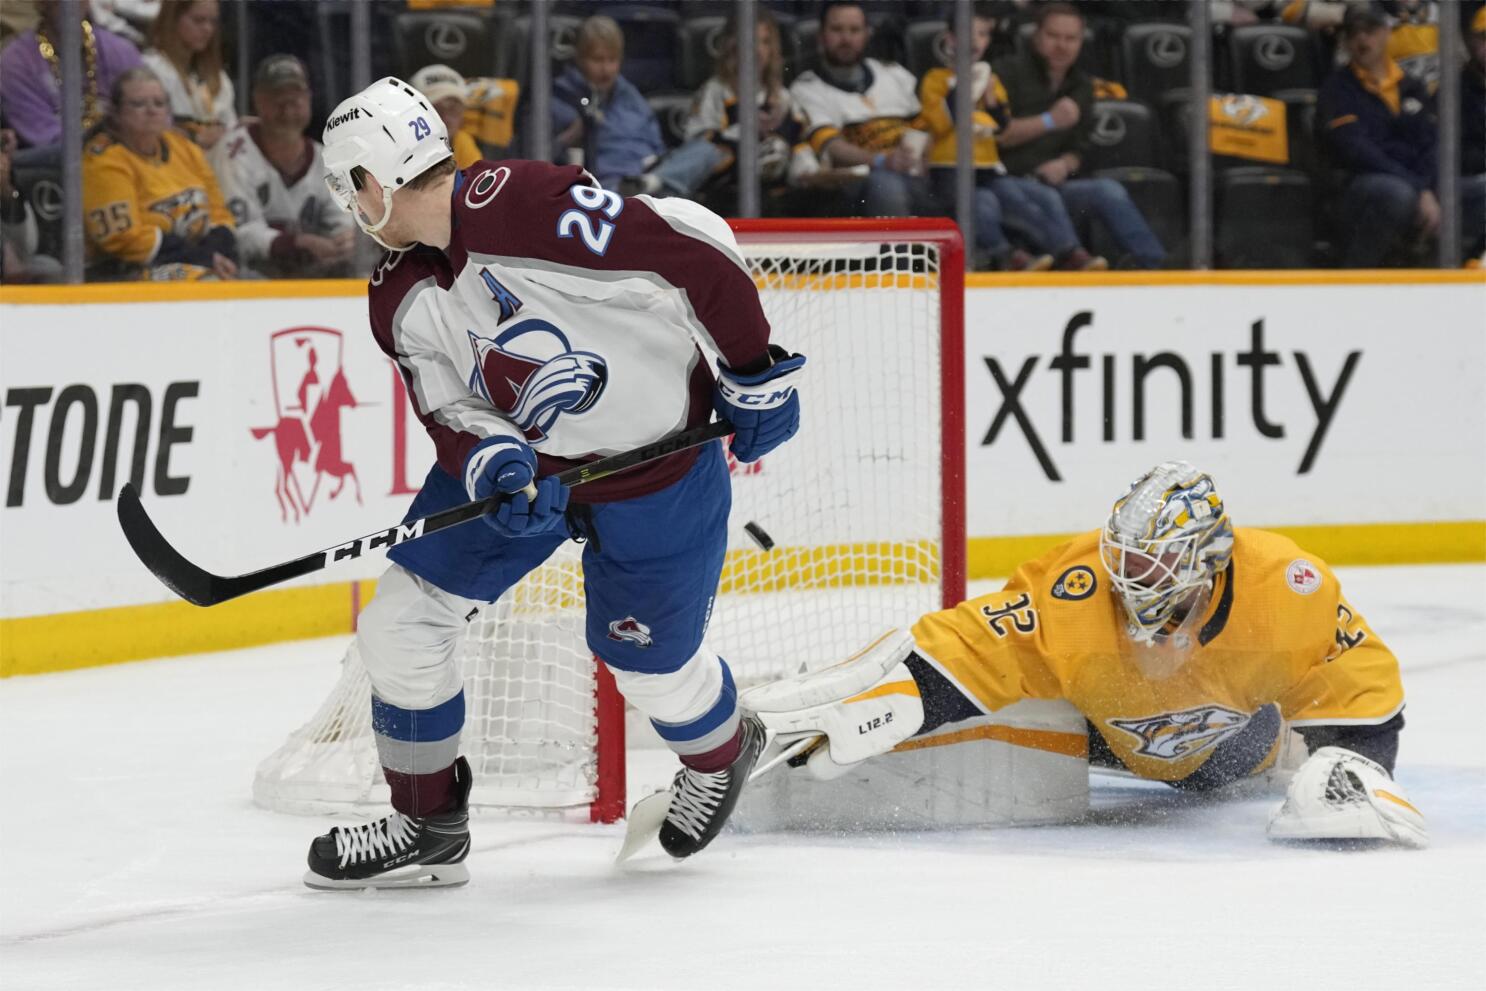 Defending Stanley Cup champion Avs peaking at the right time